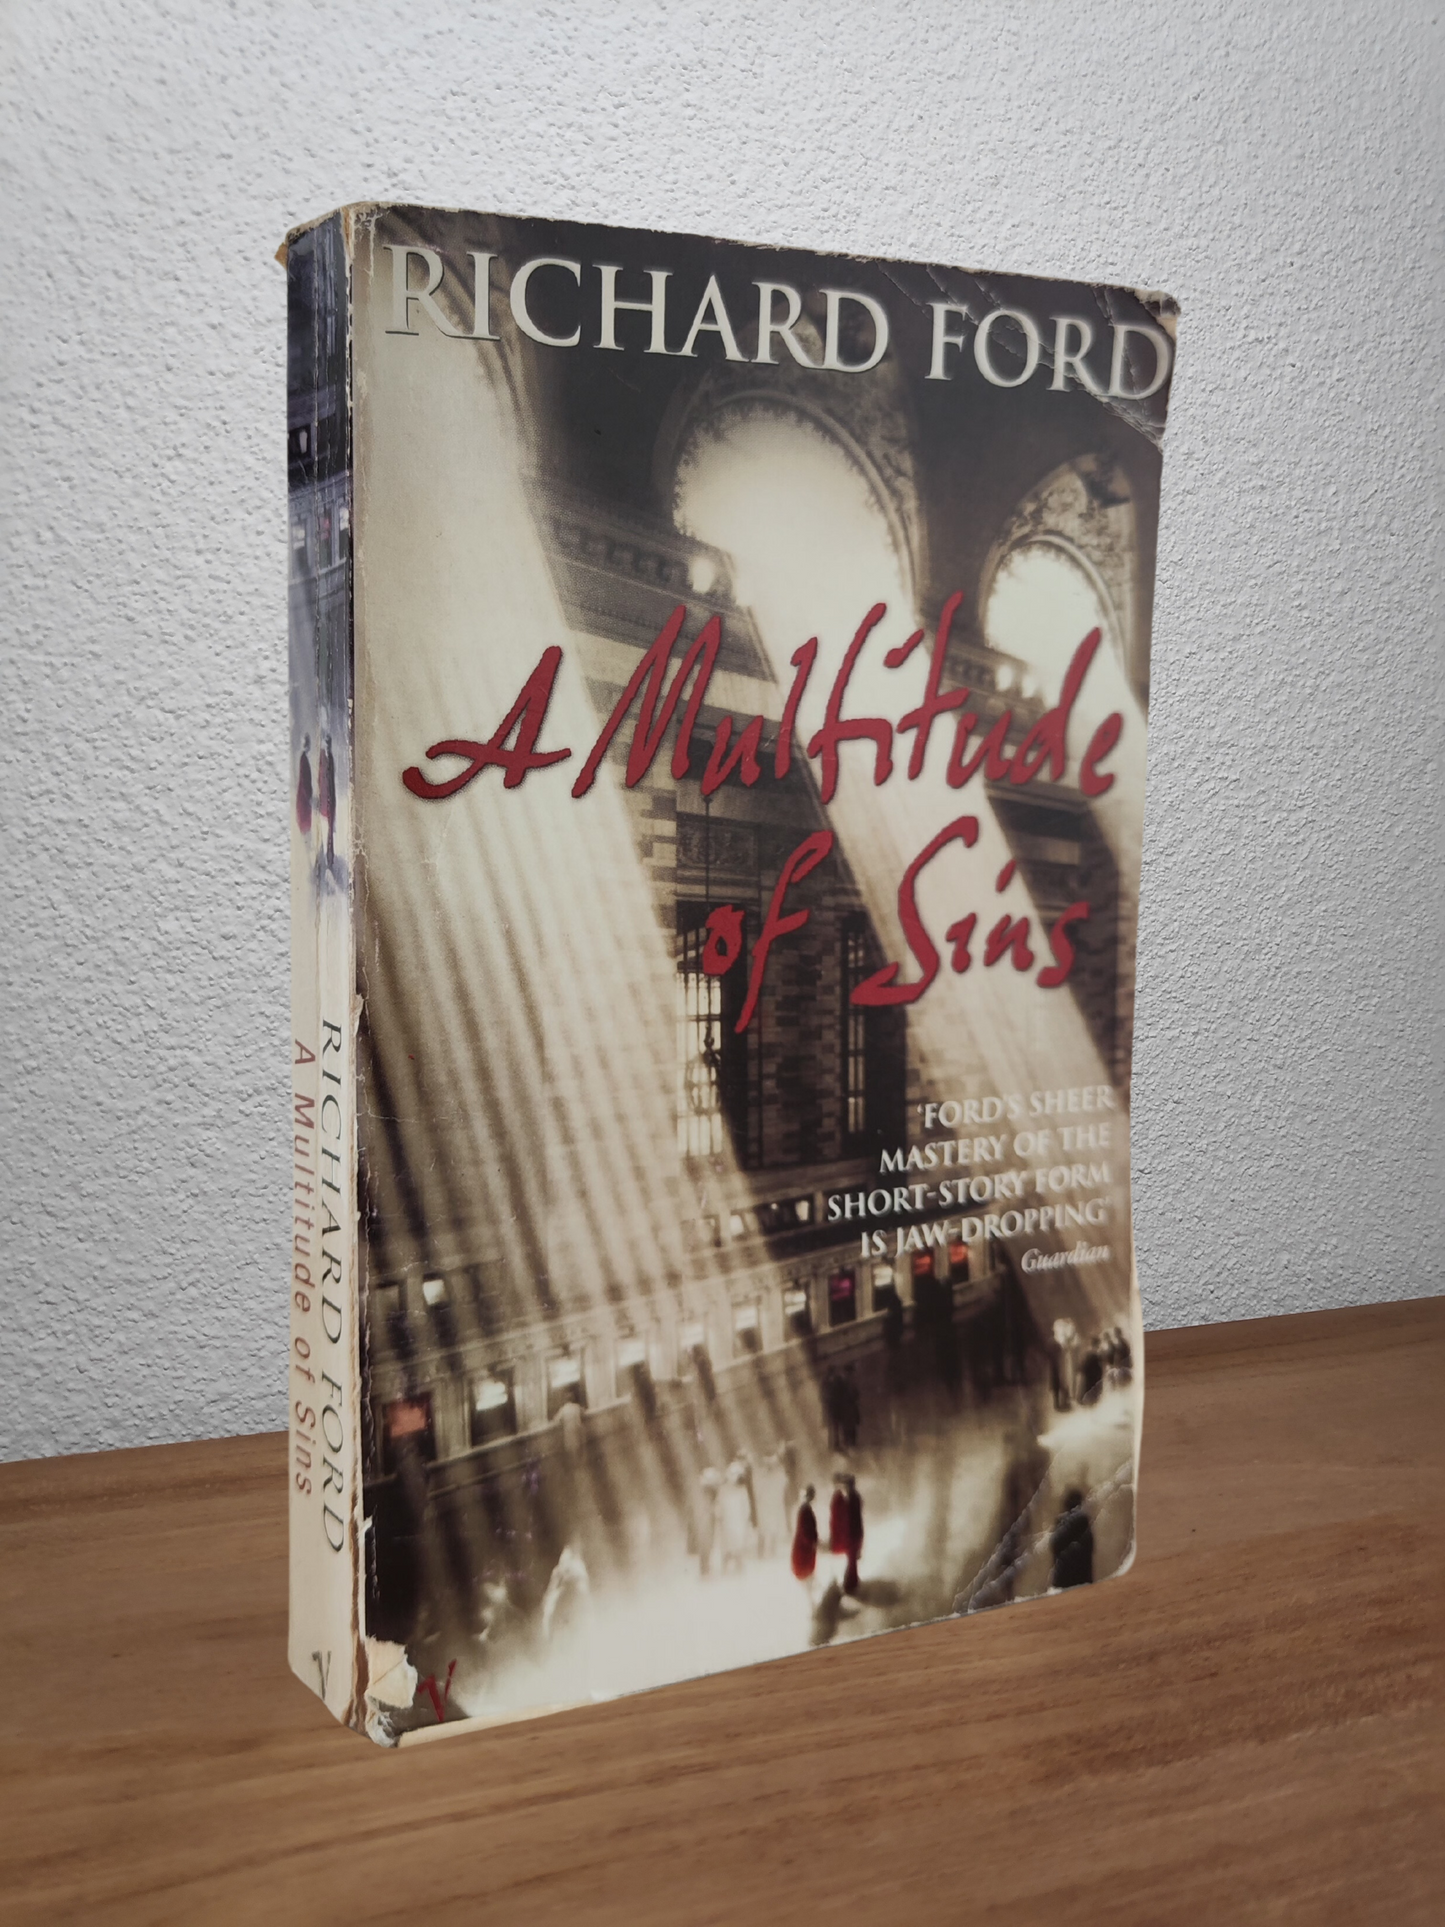 Richard Ford - A Multitude of Sins